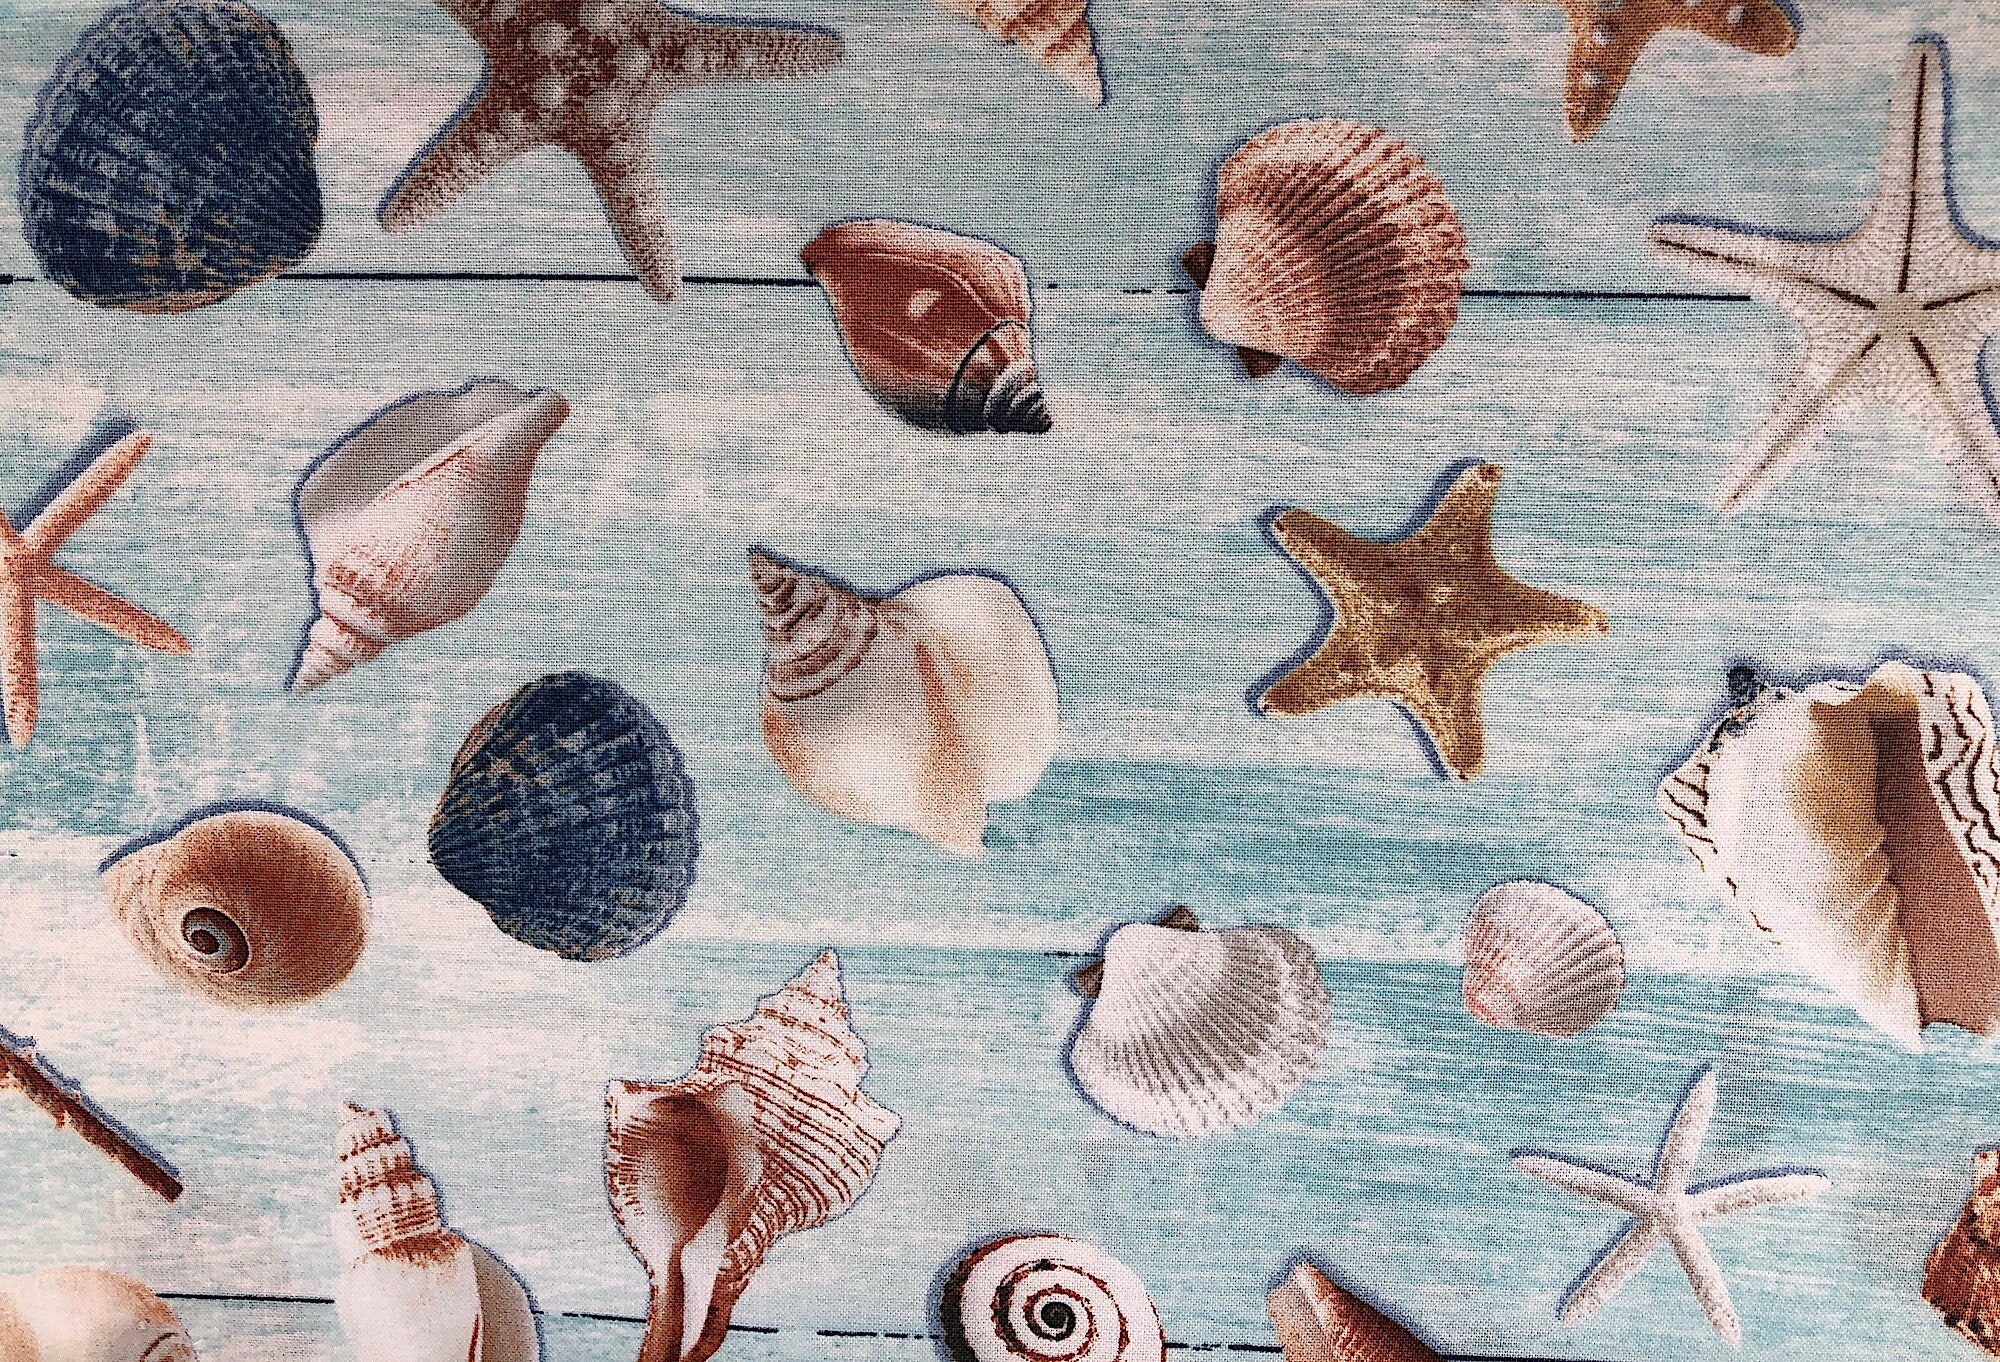 This fabric is called All Over Seashells and has various sea shells on a blue and white background.